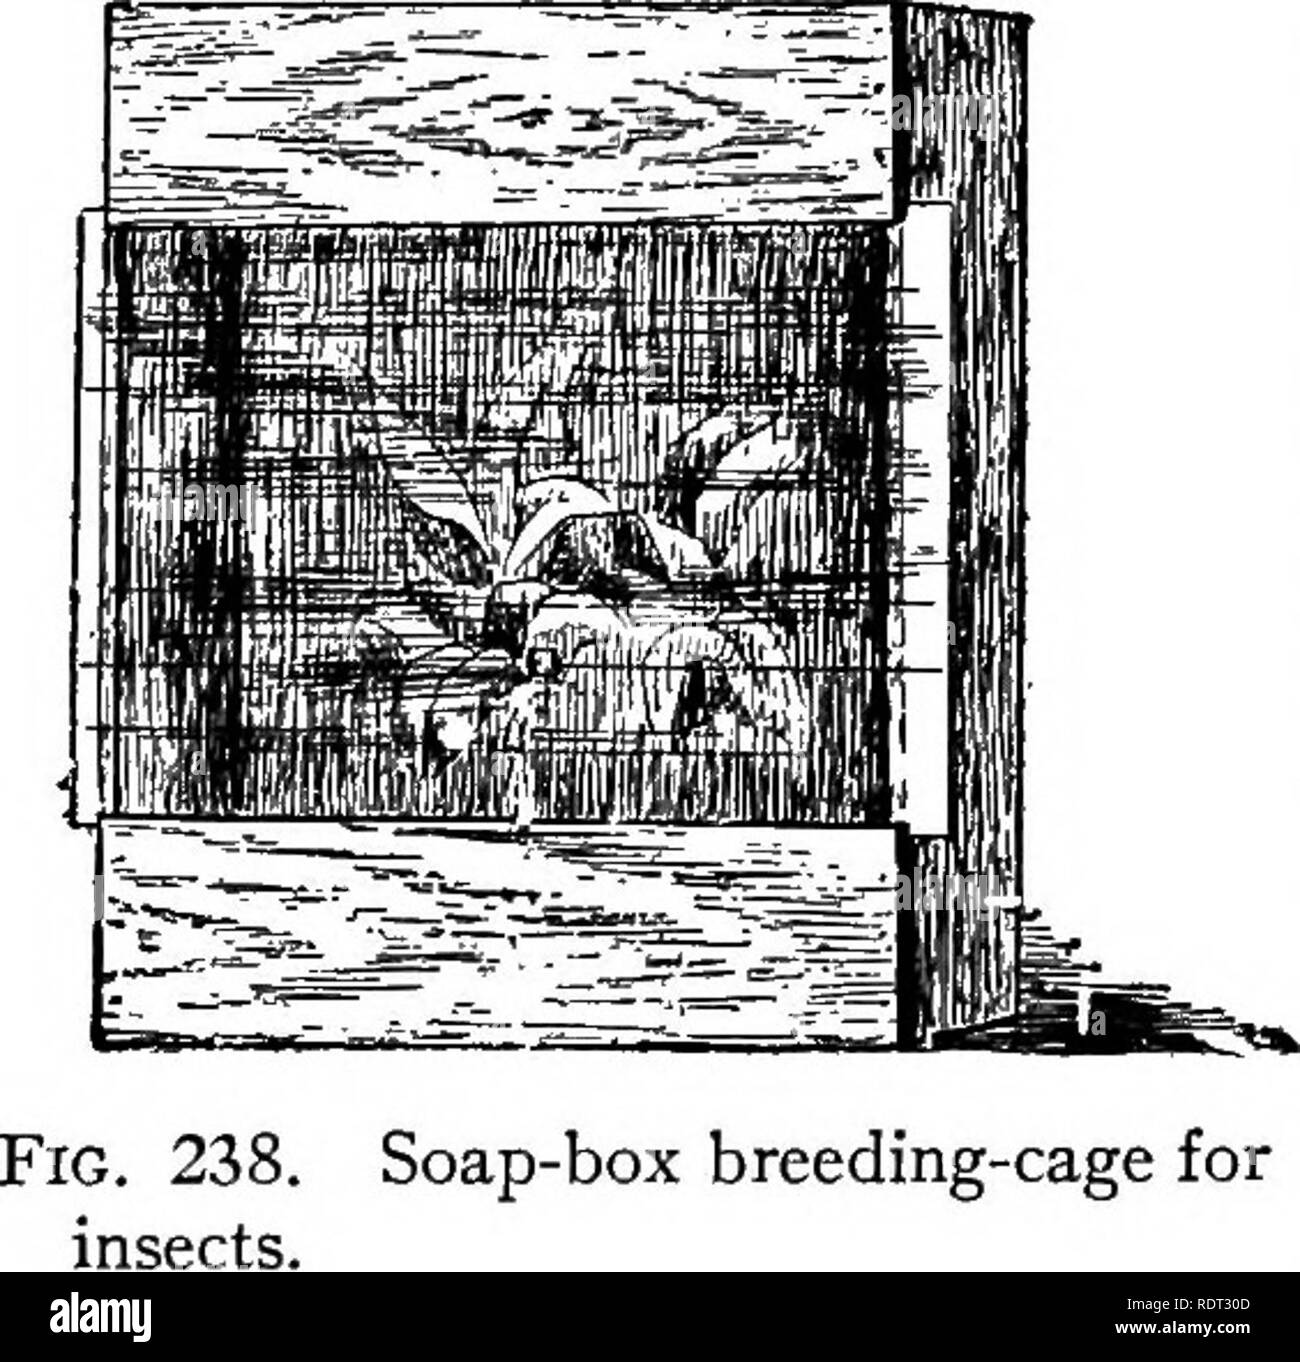 . The animals and man; an elementary textbook of zoology and human physiology. Zoology; Physiology. 470 THE ANIMALS AND MAN the glass so as to admit of a layer of soil being placed in the lower part of the cage, and the glass can be made to slide, so as to serve as a door (fig. 238). The glass should fit closely when shut, to prevent the escape of the insects. &quot;In rearing caterpillars and other leaf-eating larvas, branches of the food-plant should be stuck into bottles or cans which are filled with sand saturated with water. By keeping the sand wet the plants can be kept fresh longer than Stock Photo